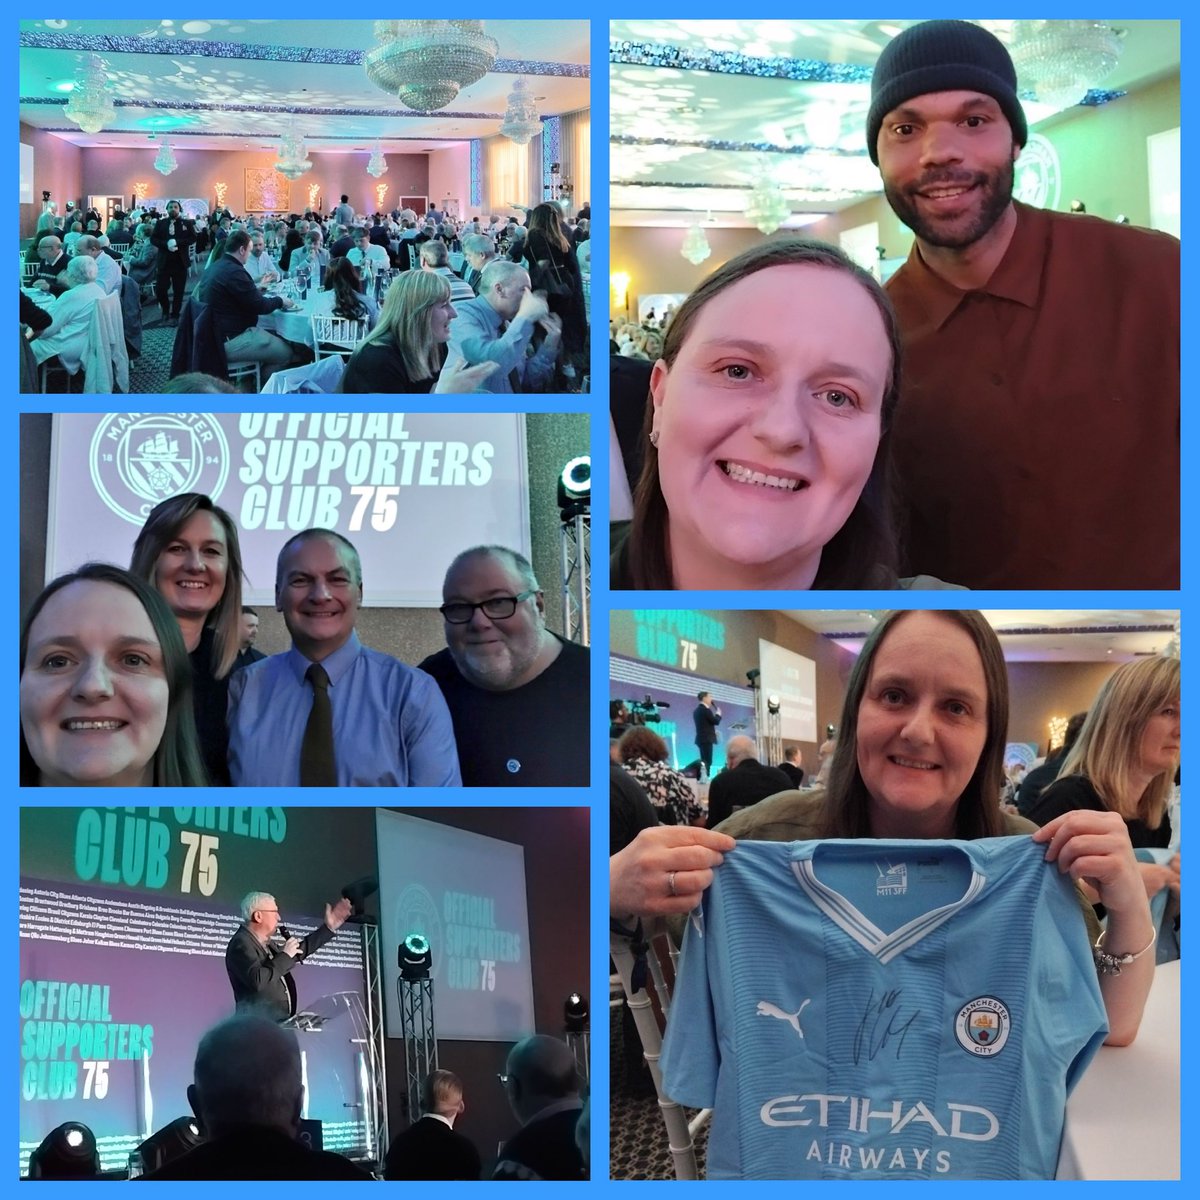 A FANTASTIC evening at the @ManCity @TheOSC8 75th Anniversary Dinner

Thank you to @KevinP184 @FanzoneDanny @GaryJamesWriter @jamesyheidi @JoleonLescott all the branches and former players for a brilliant evening

@blueberry1894 even won a signed @JackGrealish shirt in the Quiz